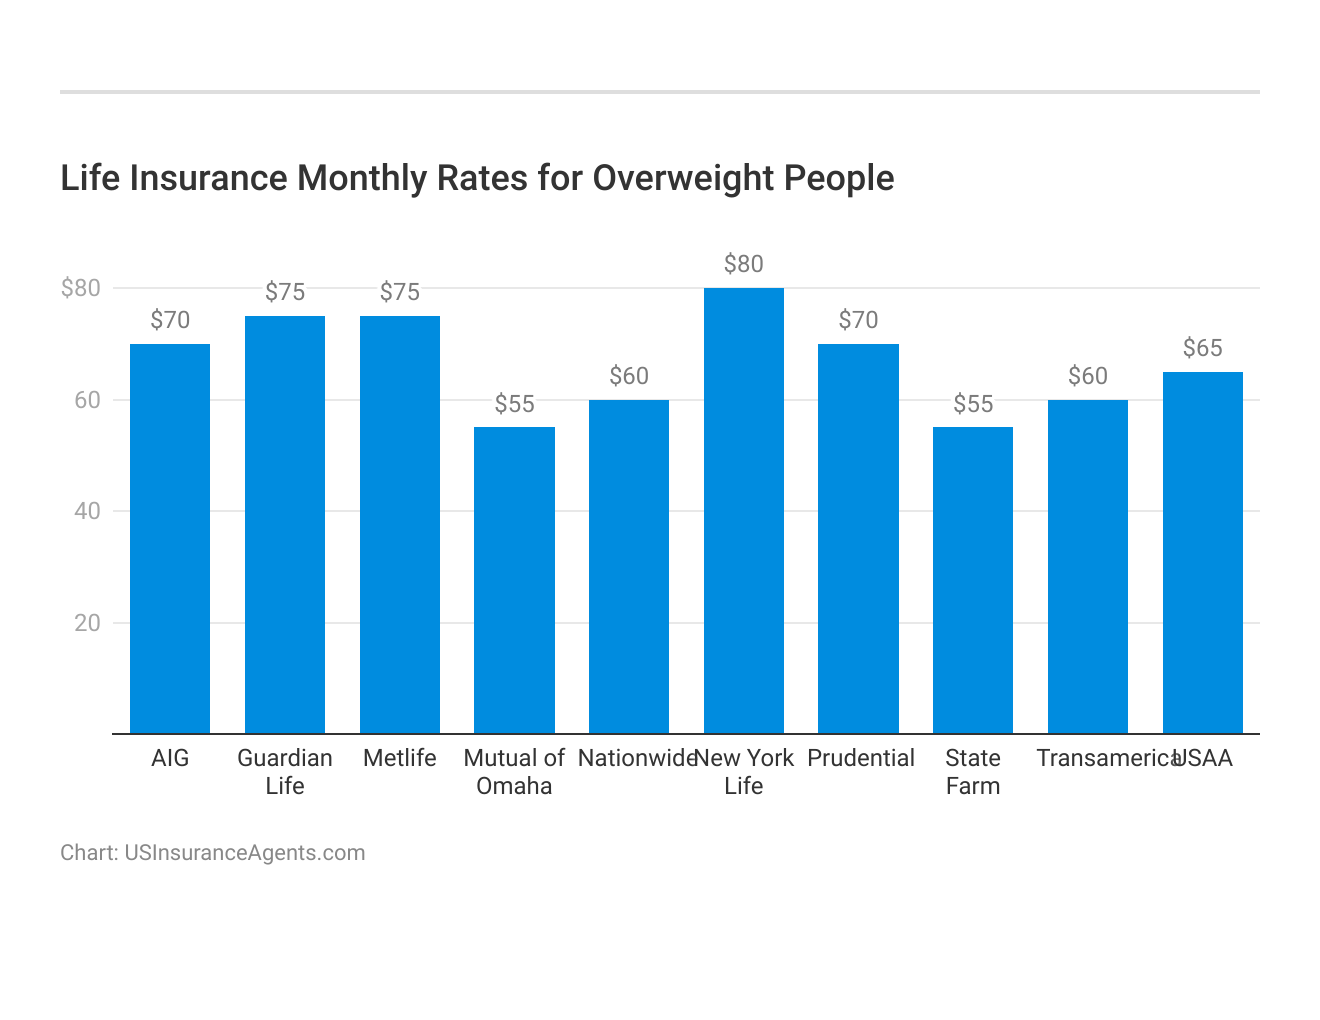 <h3>Life Insurance Monthly Rates for Overweight People</h3>